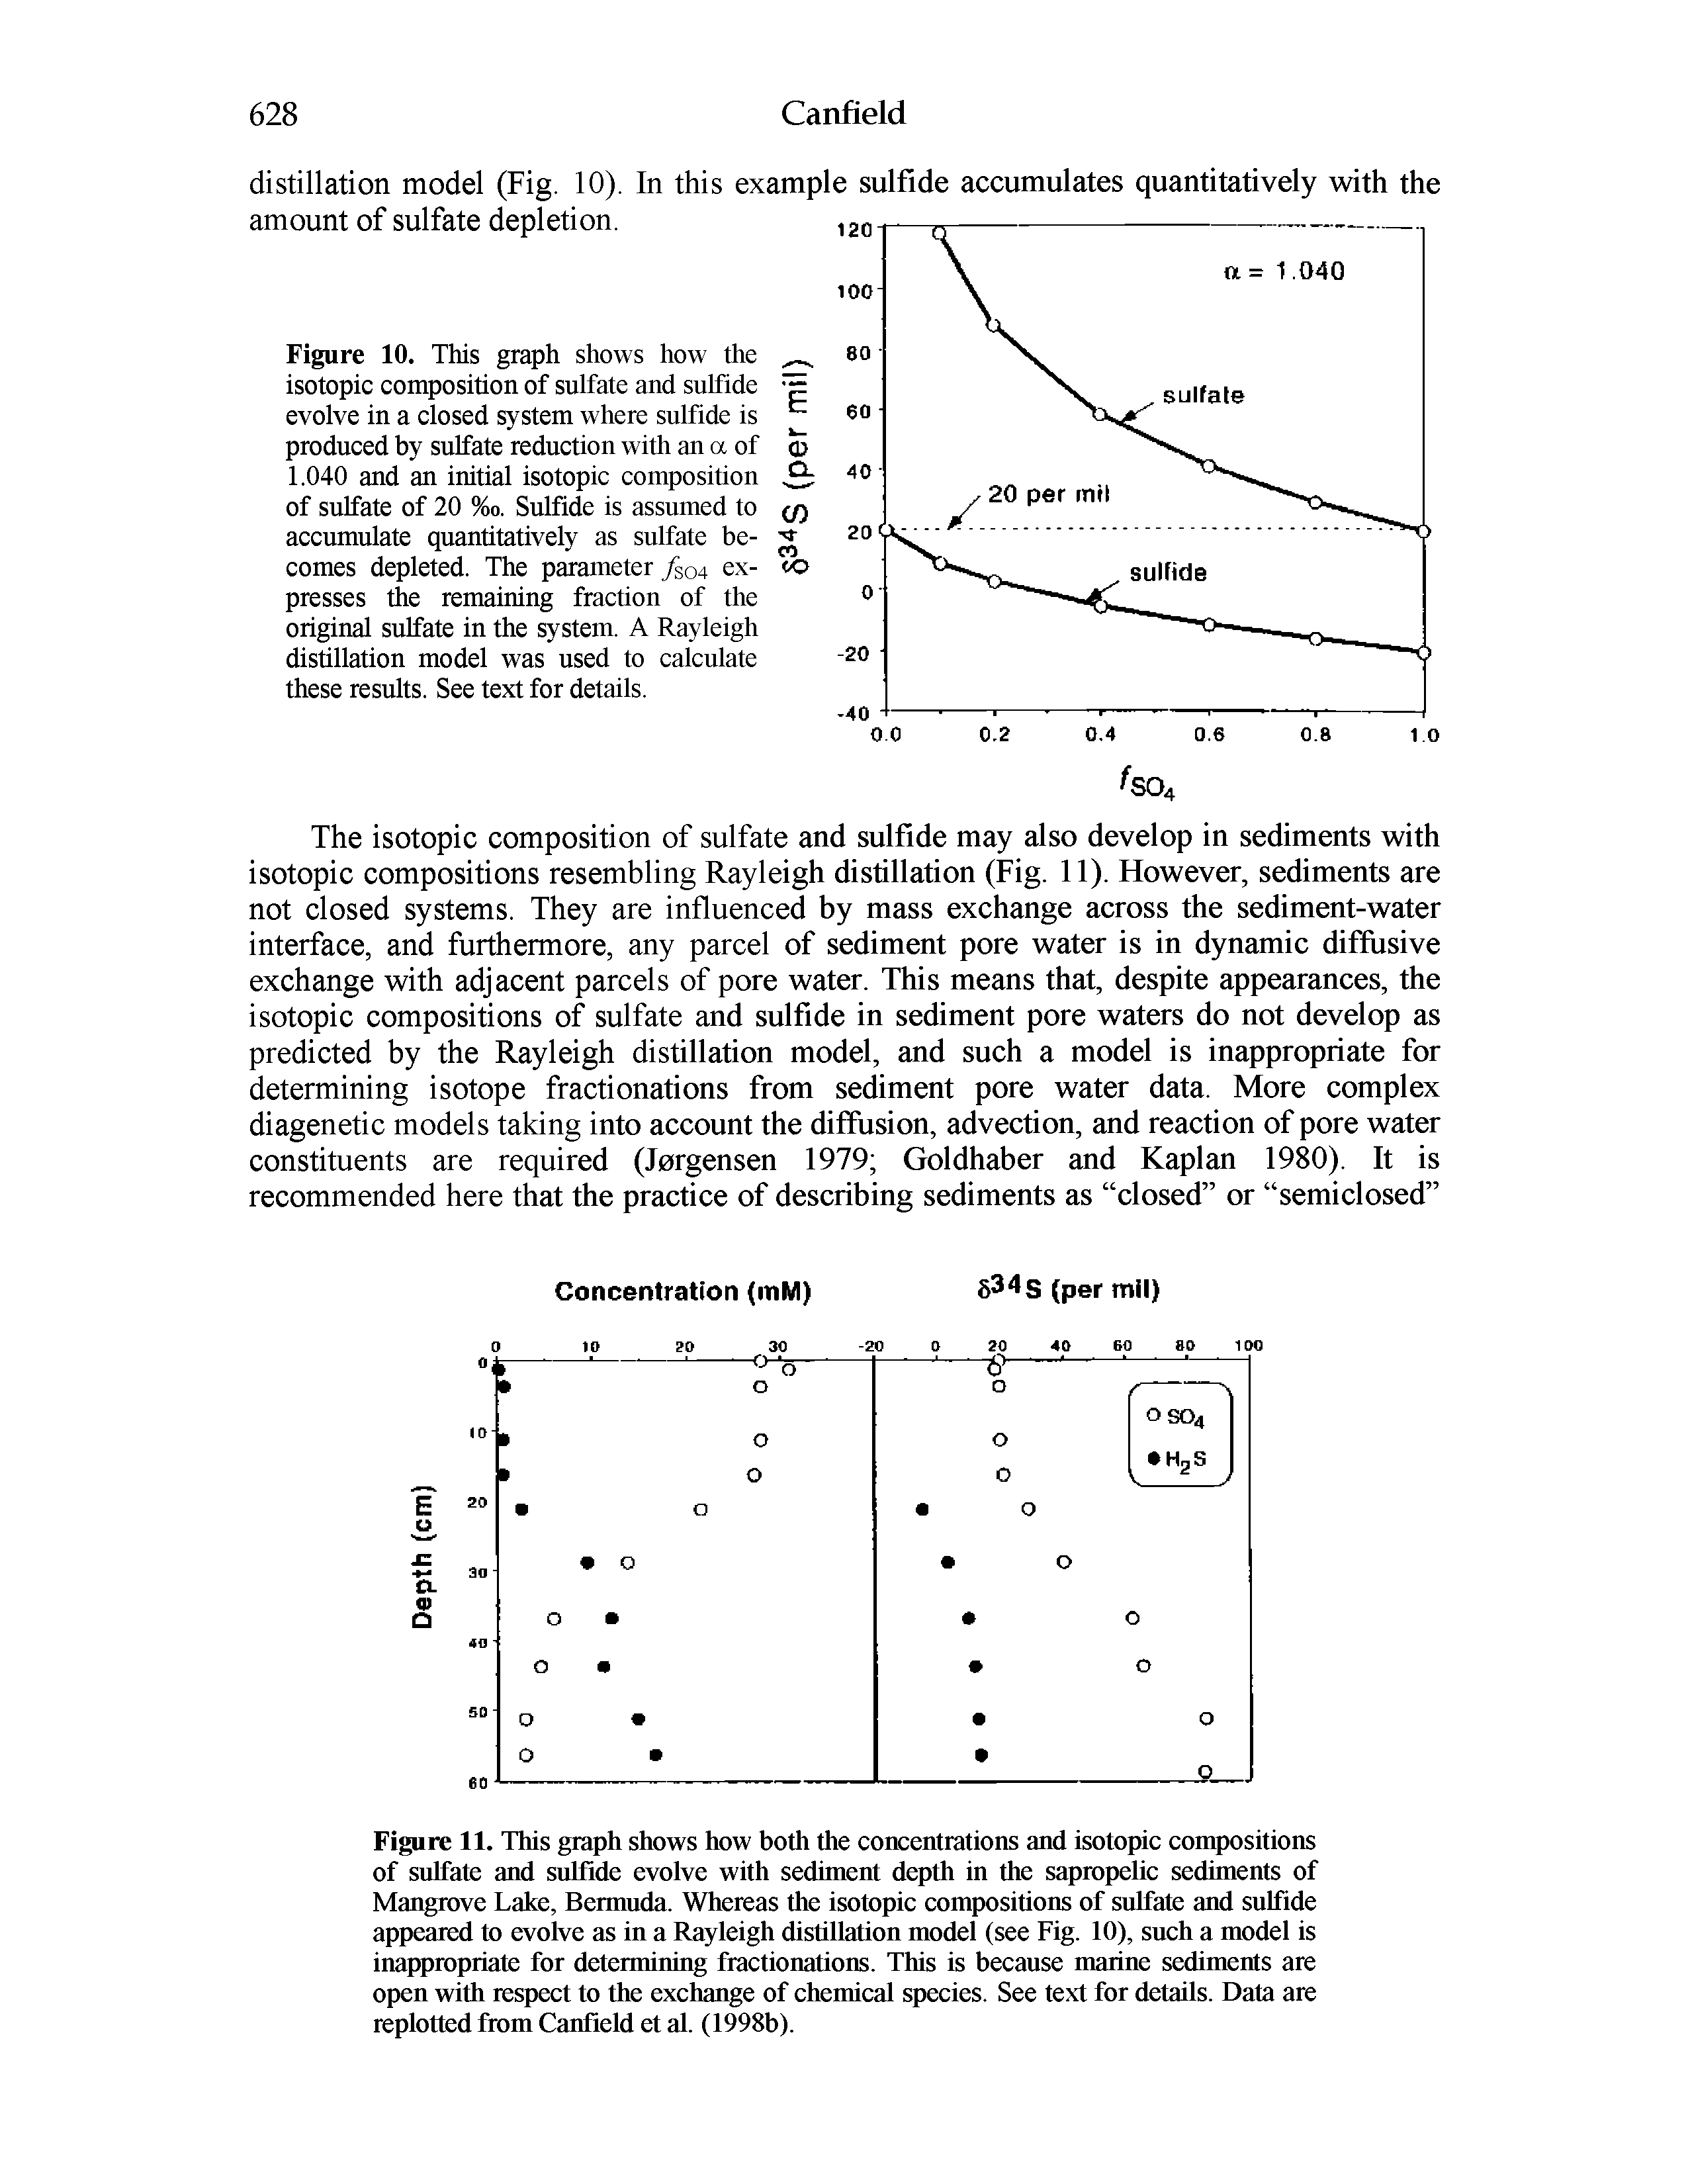 Figure 11. This graph shows how both the concentrations and isotopic compositions of snlfate and snffide evolve with sediment depth in the sapropelic sediments of Mangrove Lake, Bermnda. Whereas the isotopic compositions of snlfate and sulfide appeared to evolve as in a Rayleigh distillation model (see Fig. 10), snch a model is inappropriate for determining fractionations. This is because marine sediments are open with respect to the exchange of chemical species. See text for details. Data are replotted from Canfield et al. (1998b).